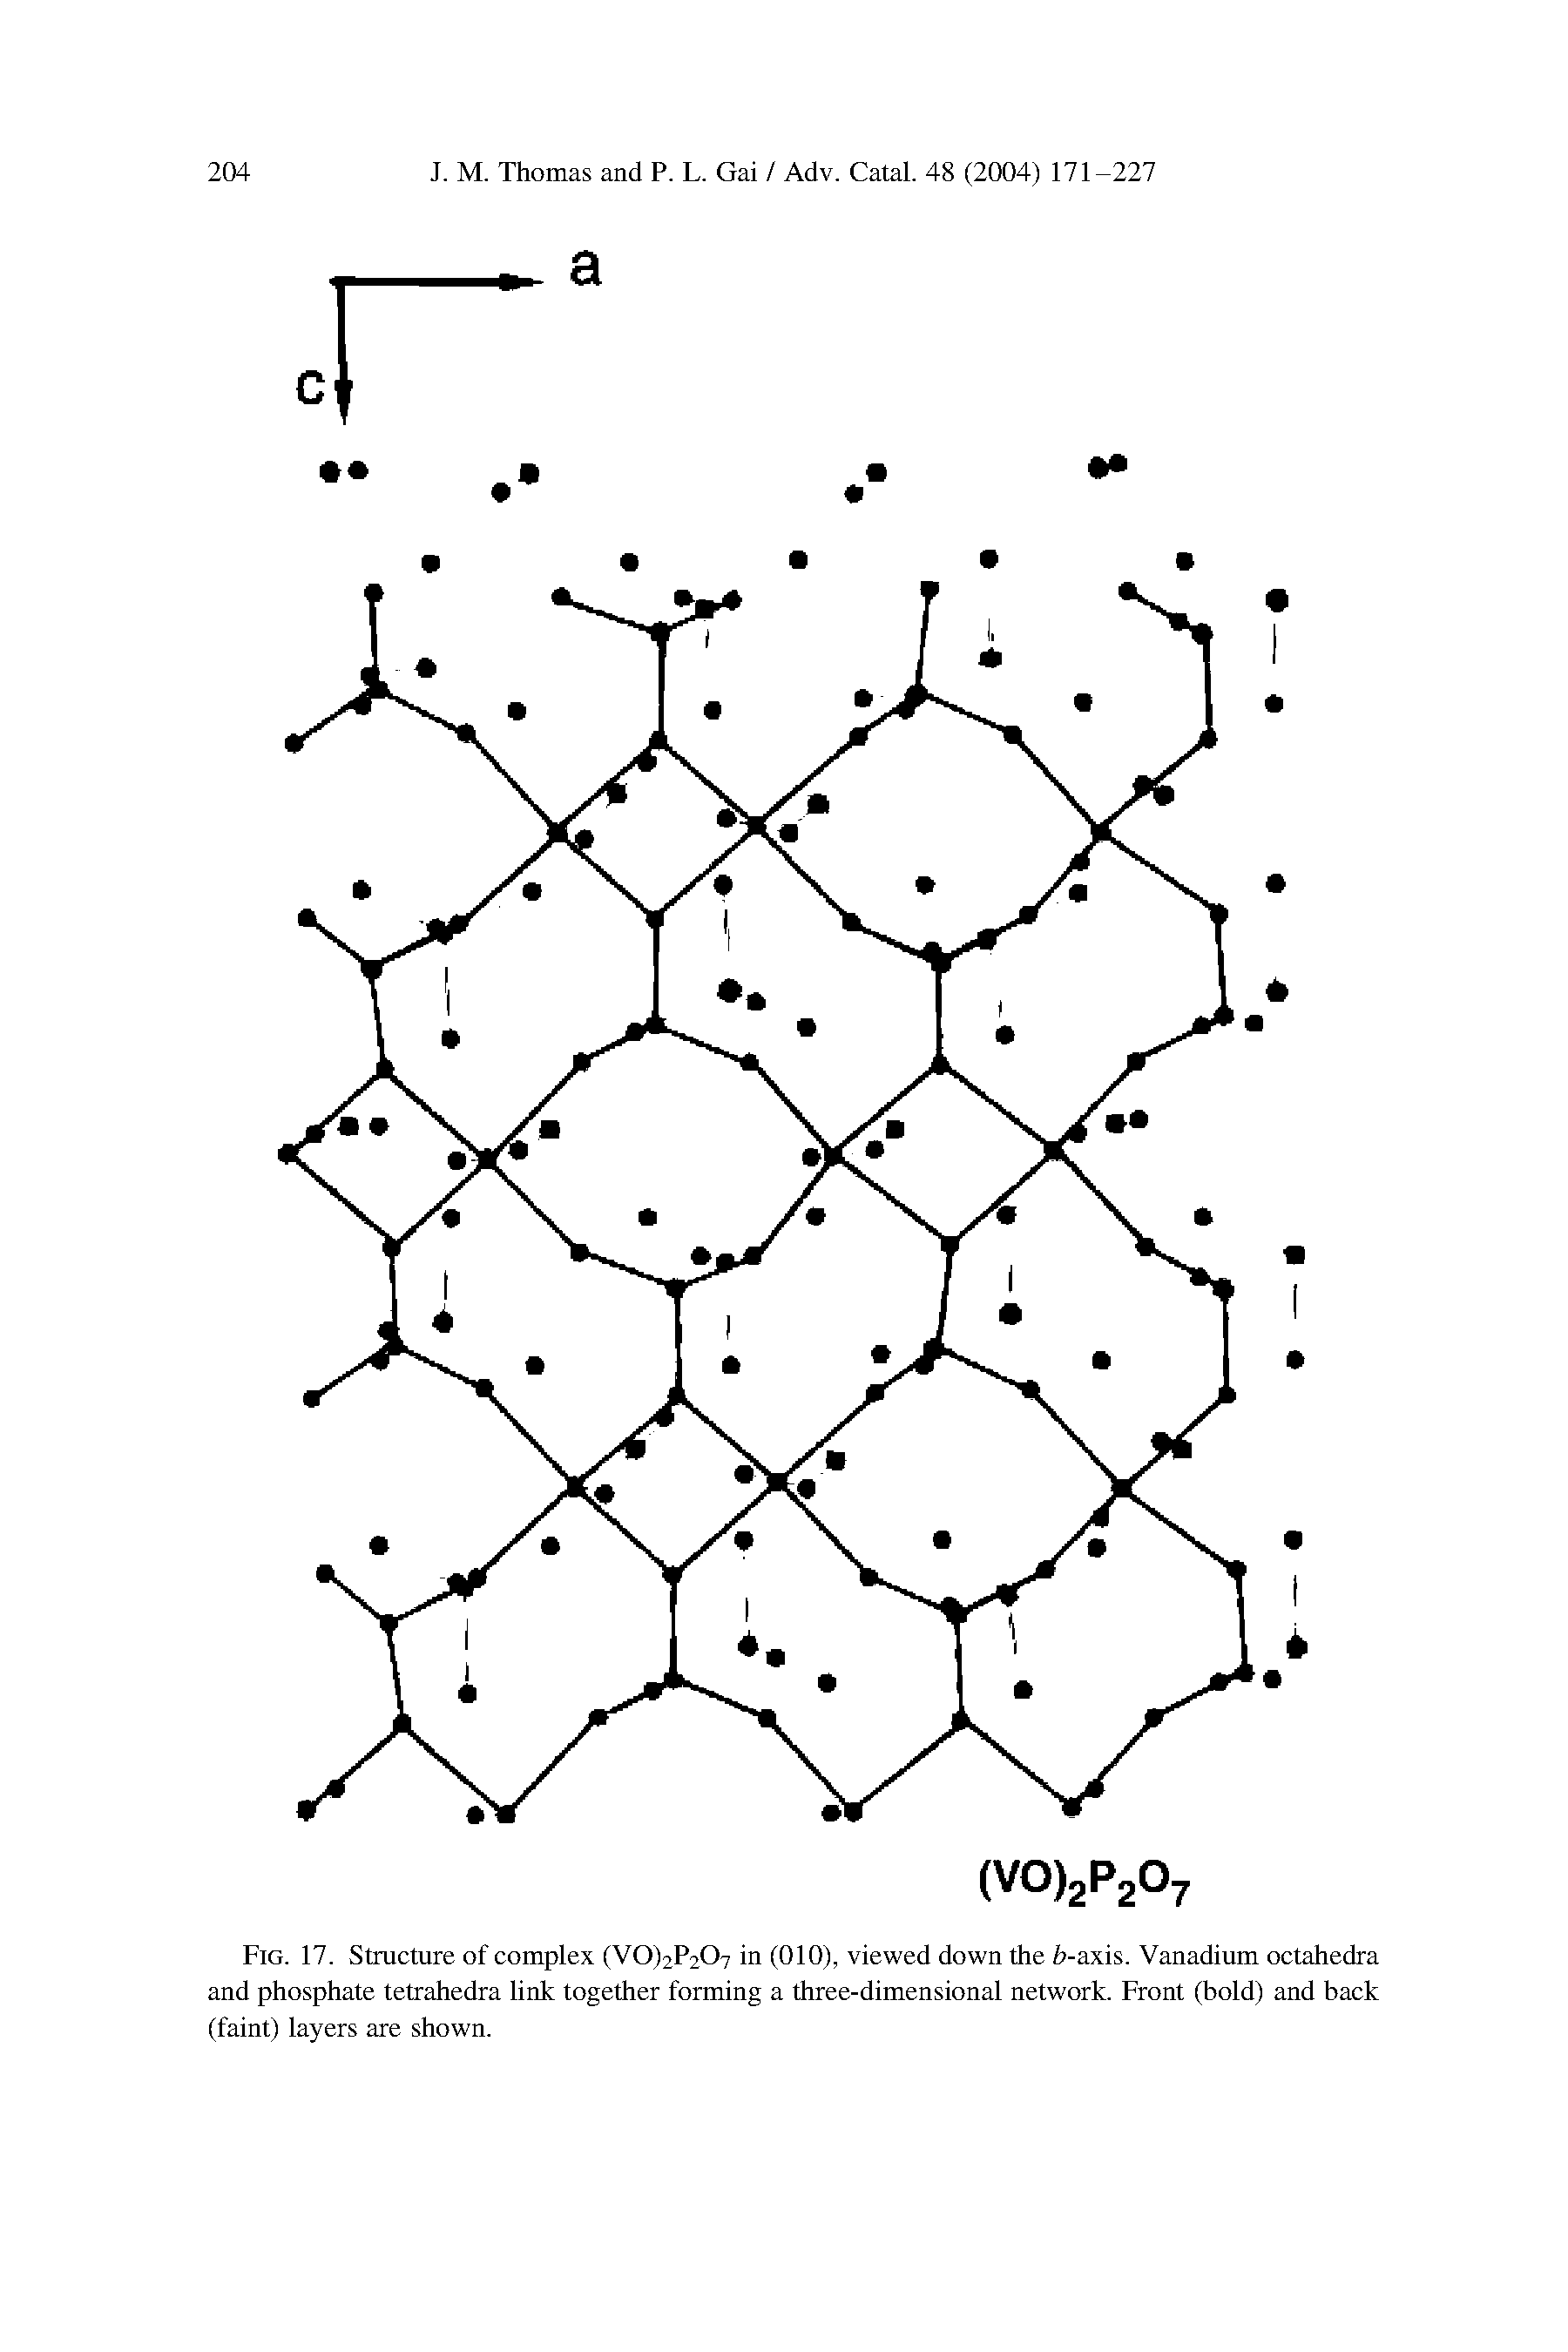 Fig. 17. Structure of complex (VO)2P2C>7 in (010), viewed down the fr-axis. Vanadium octahedra and phosphate tetrahedra link together forming a three-dimensional network. Front (bold) and back (faint) layers are shown.